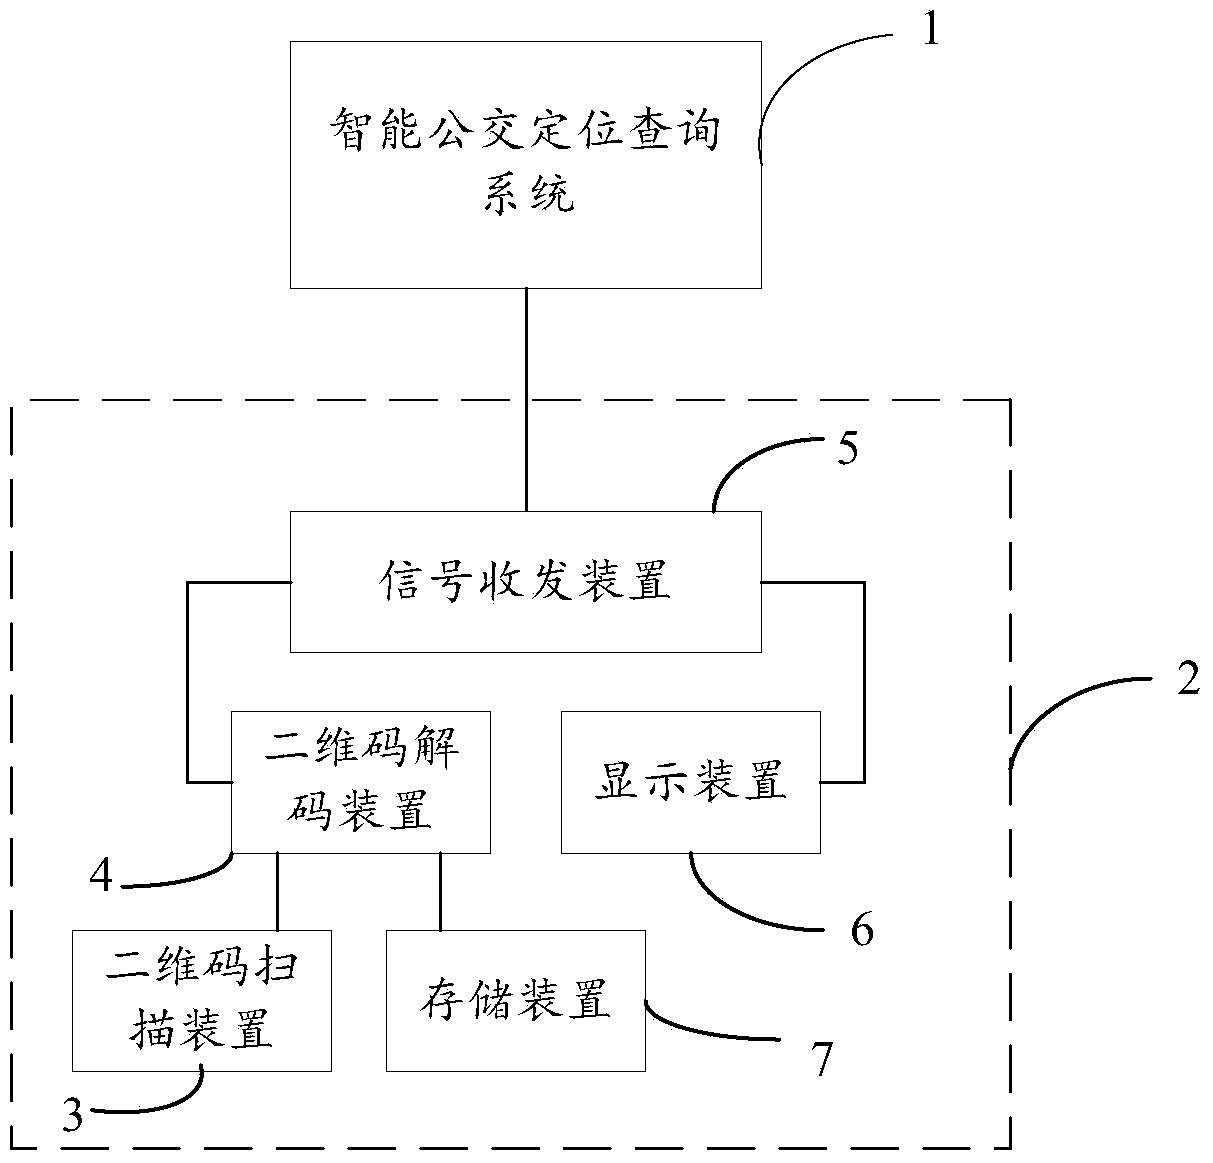 Bus station information query method and system based on two-dimension codes